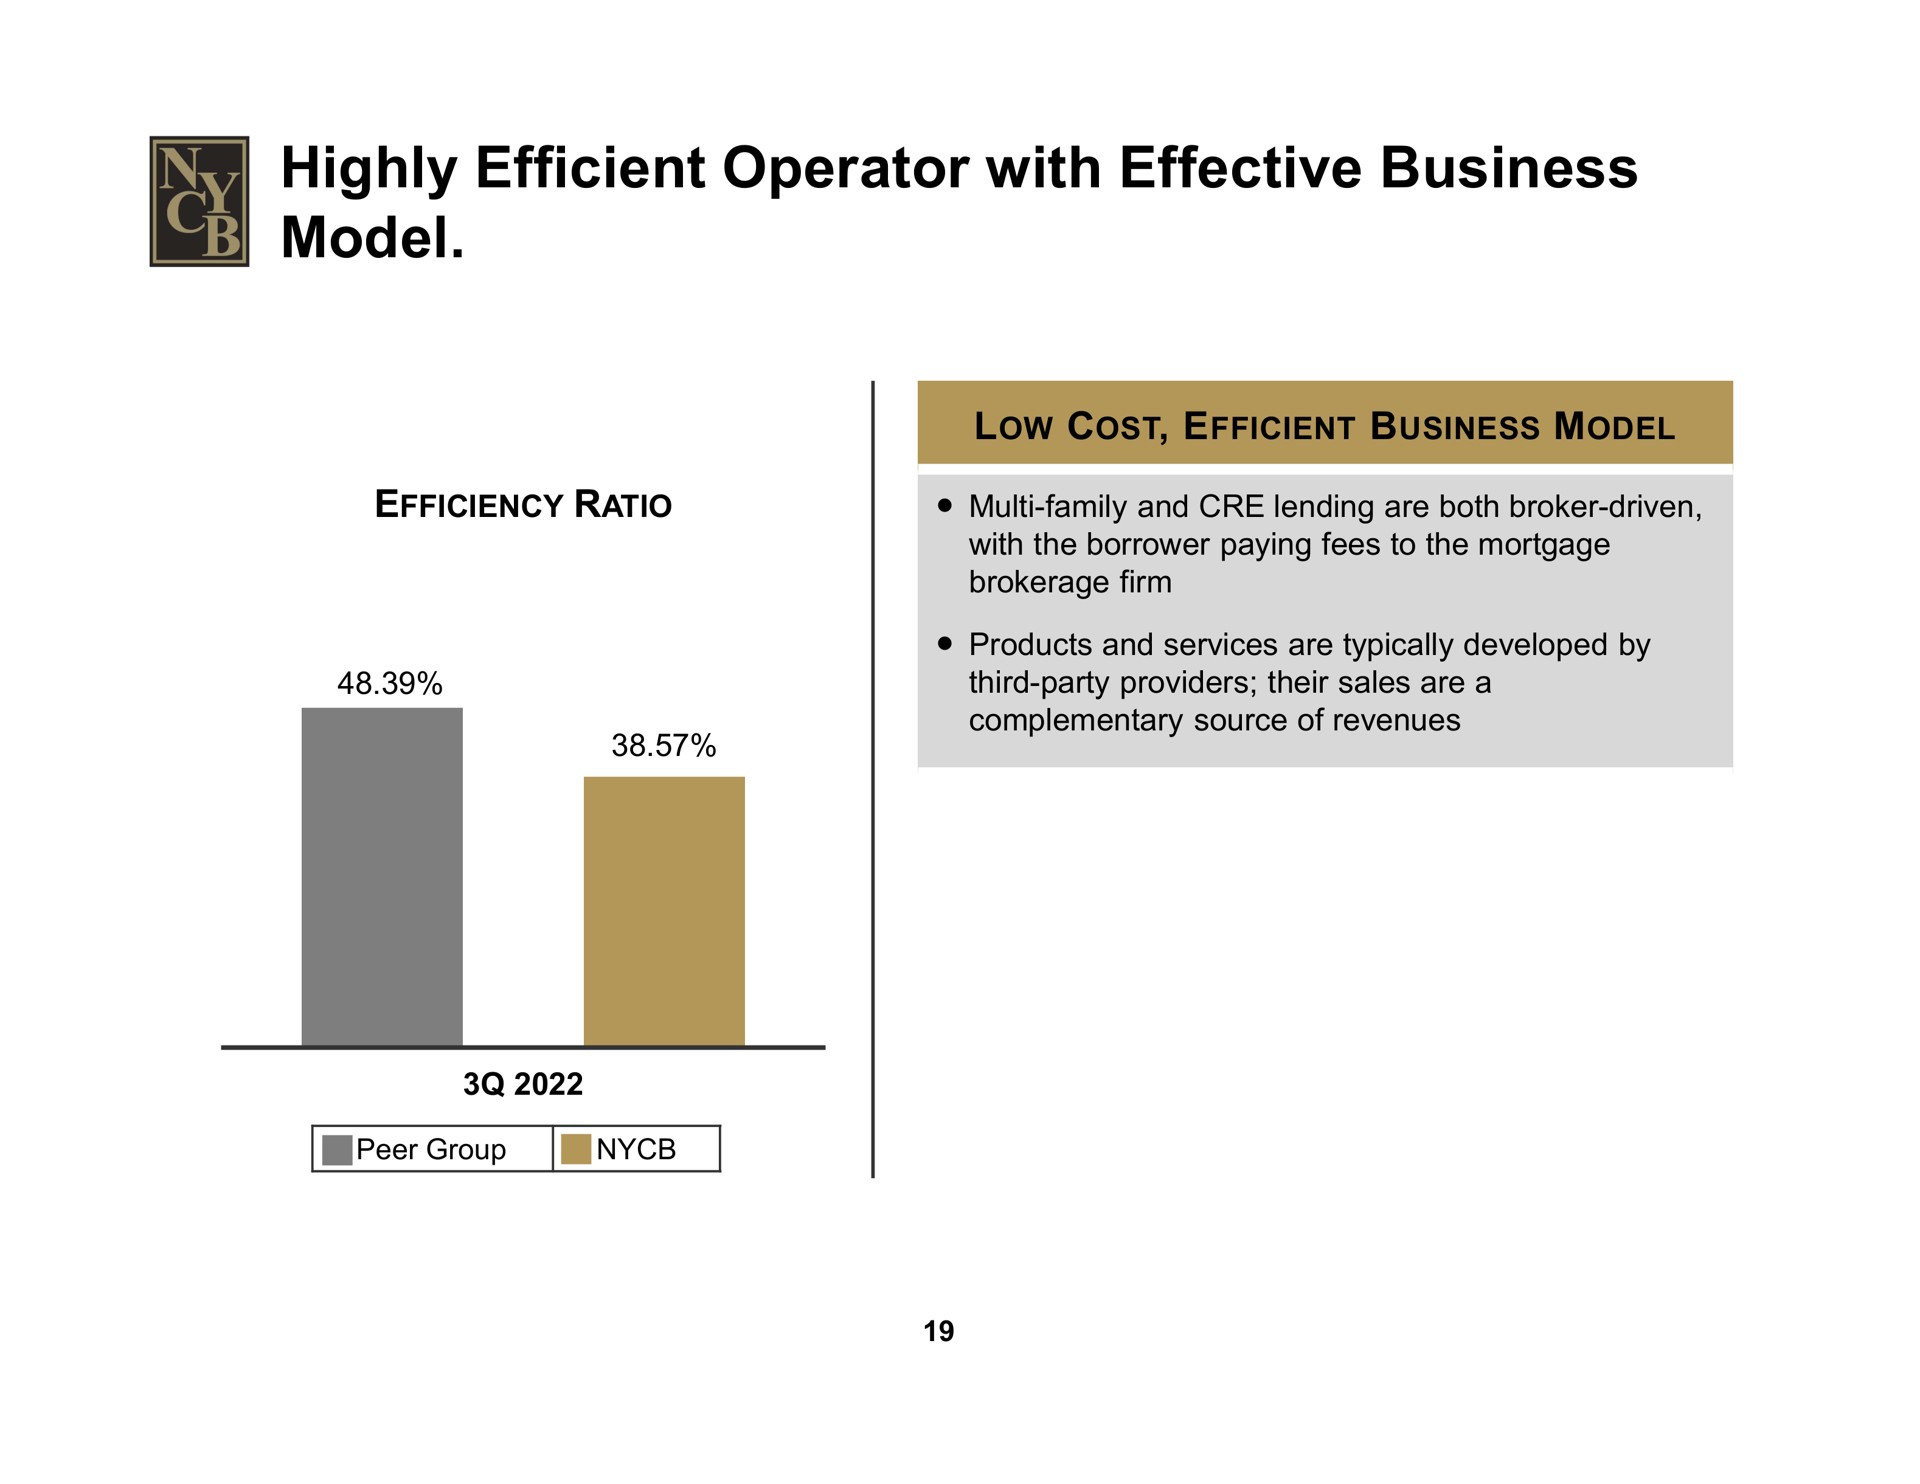 highly efficient operator with effective business model | New York Community Bancorp